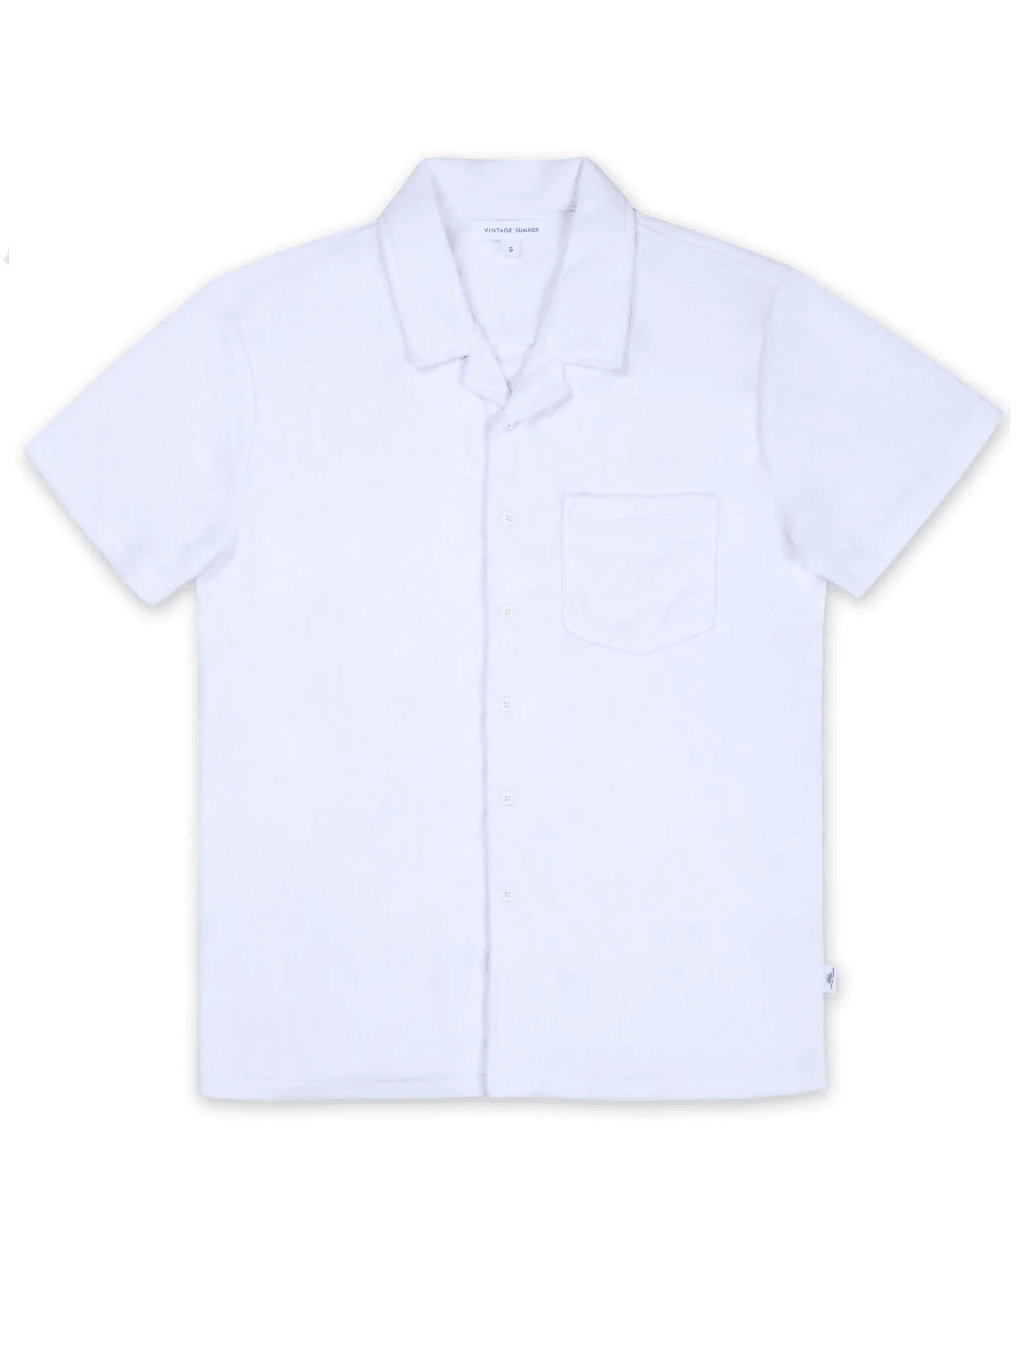 vintage summer terry towel button down white - Fullkit.com